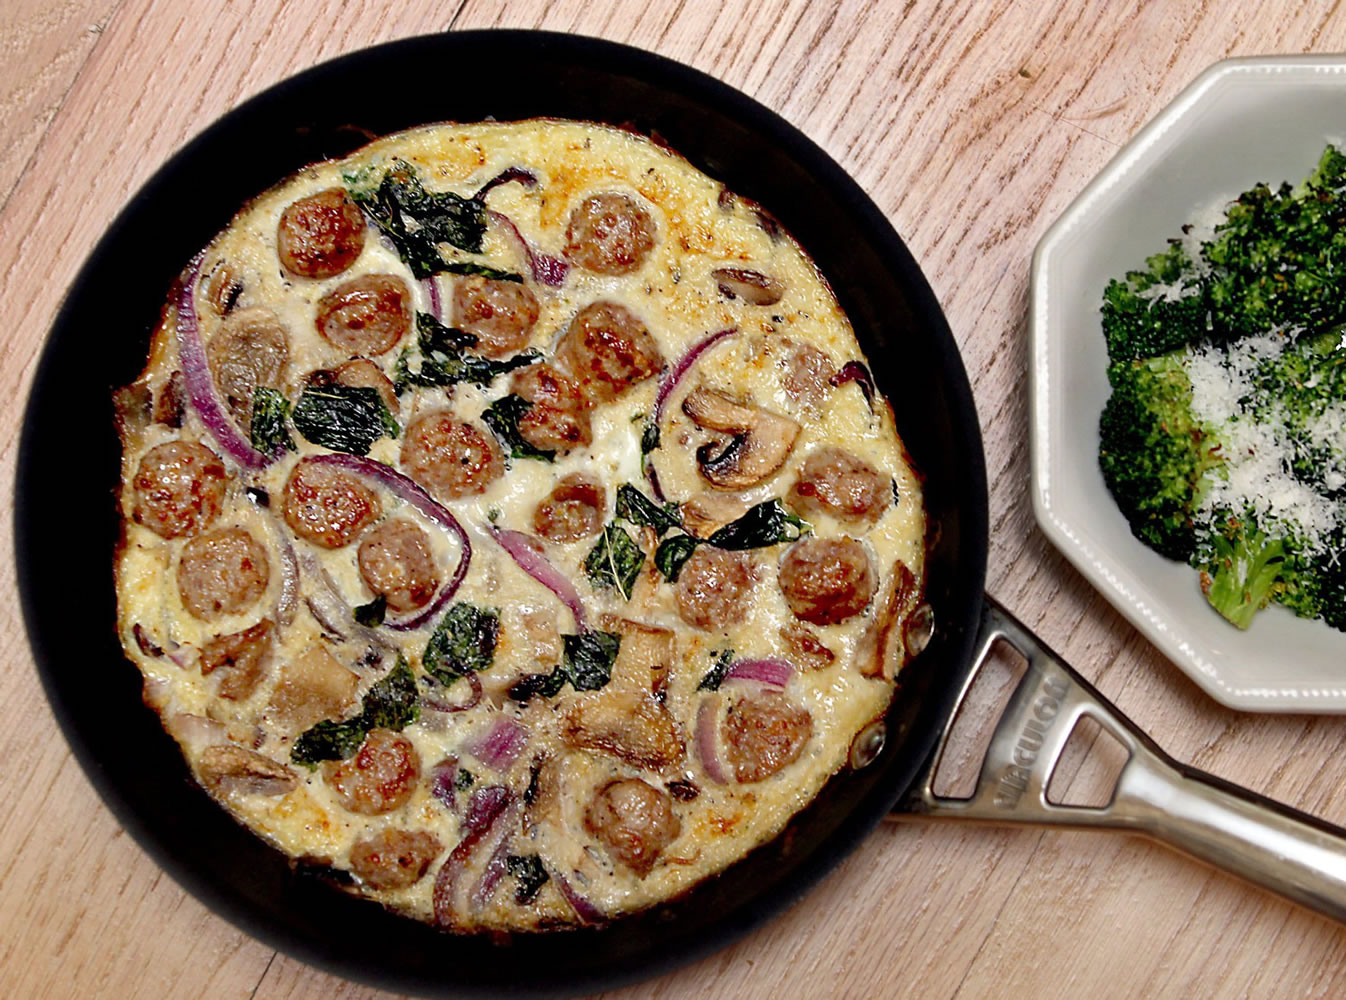 Italian Sausage Frittata with roasted Parmesan broccoli is so easy you can have dinner ready in 15 to 20 minutes.